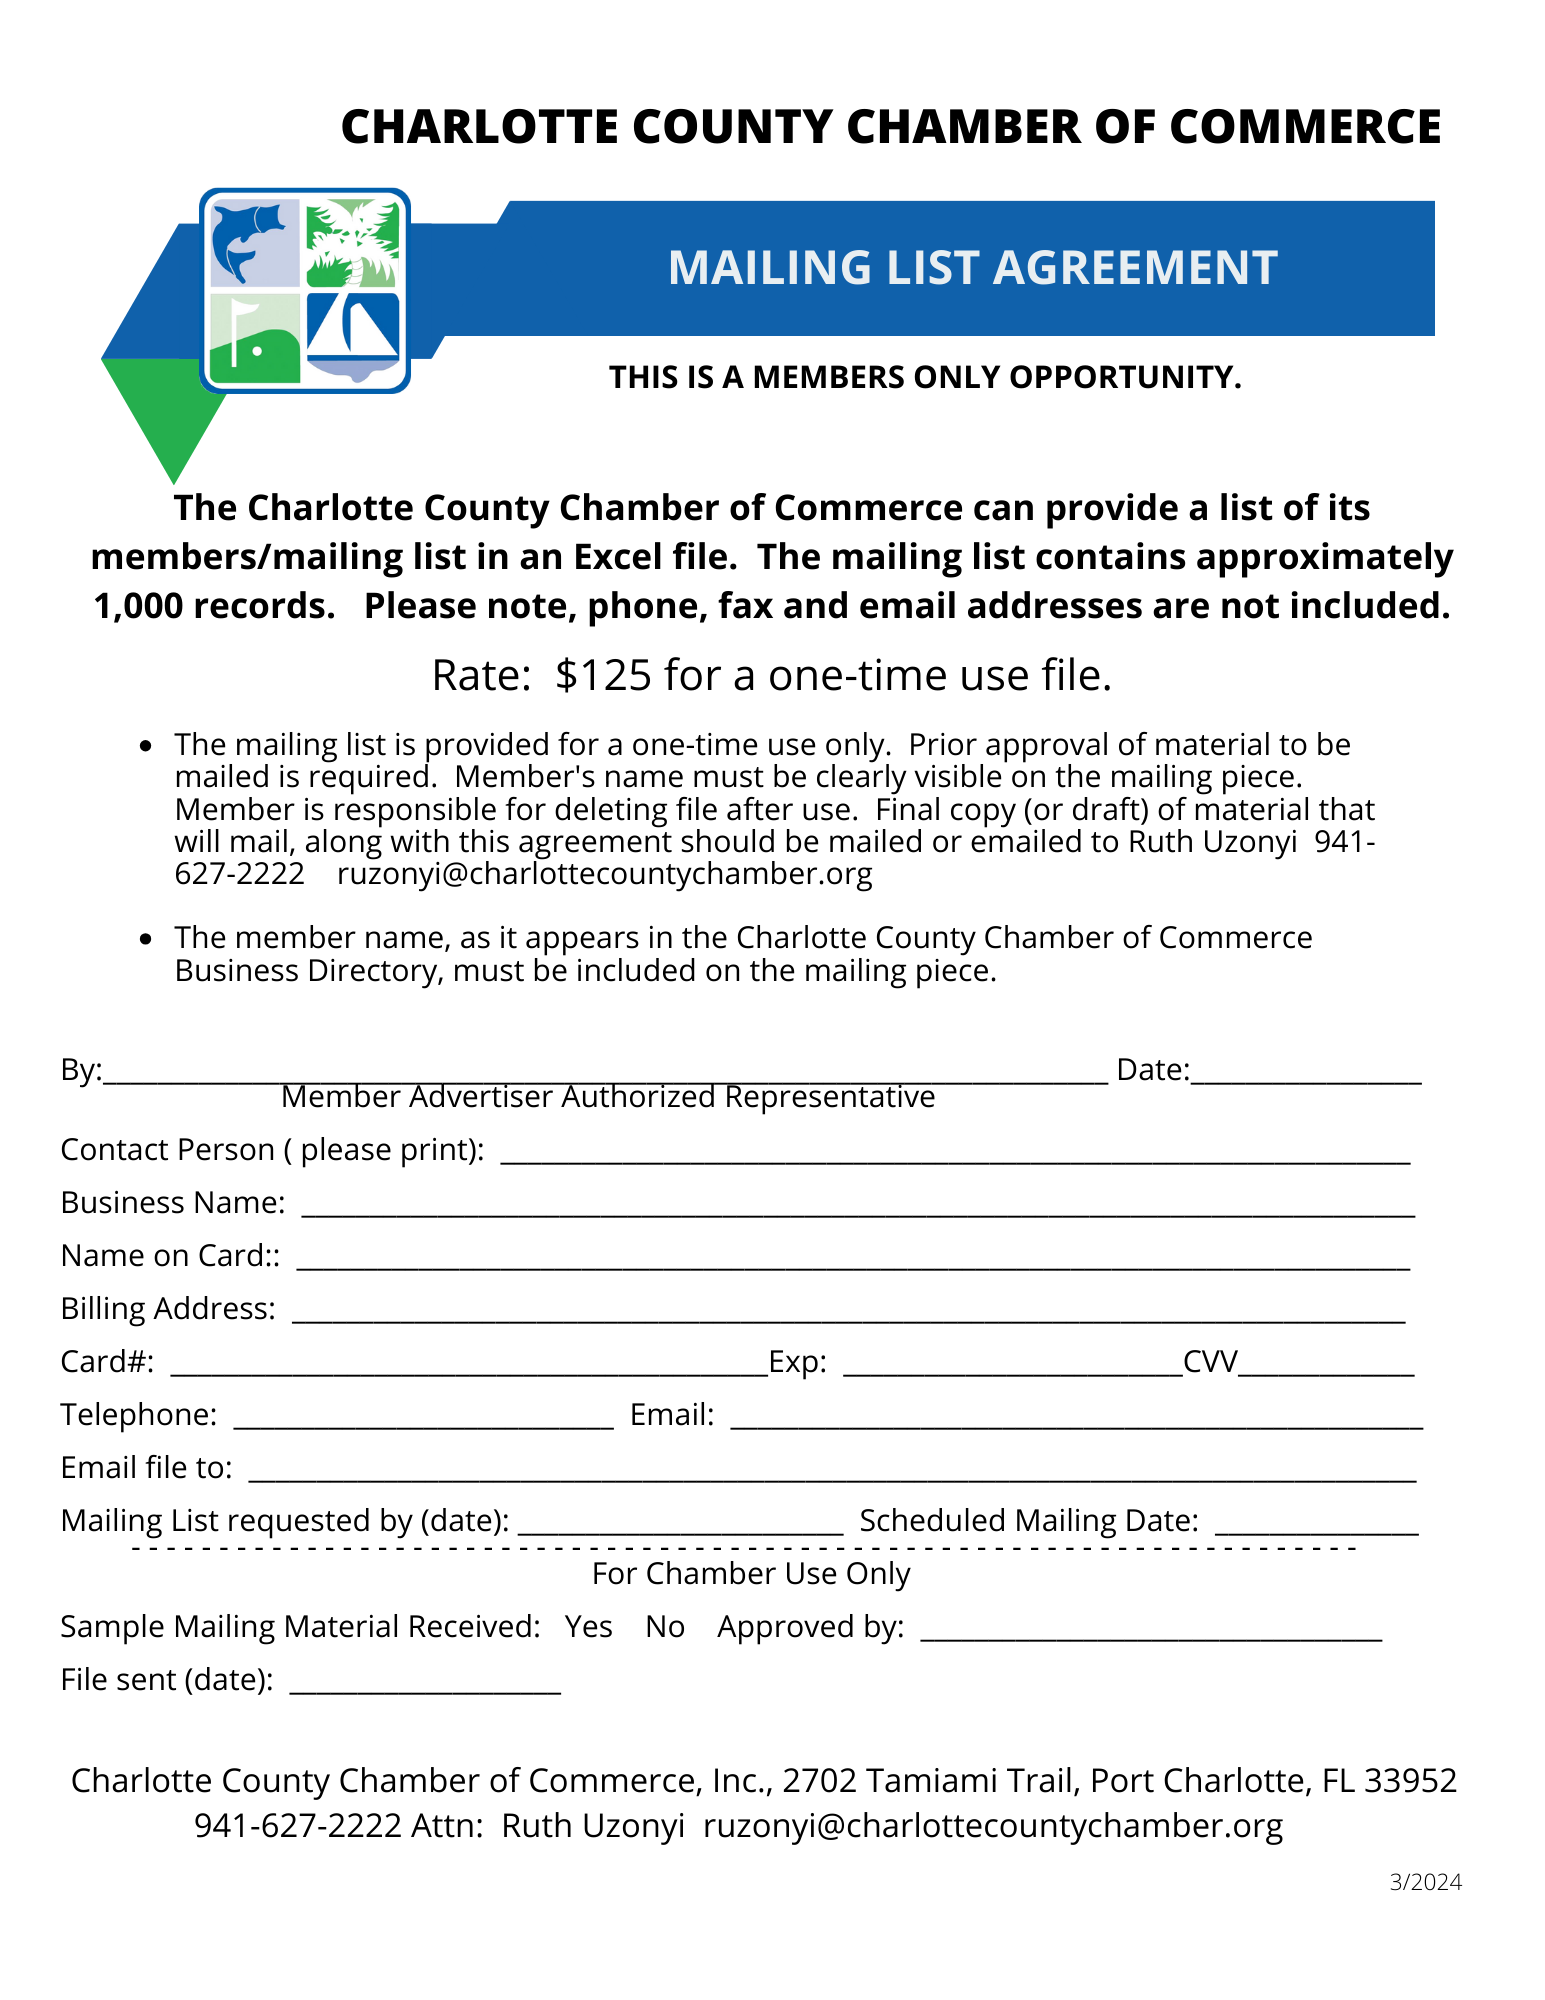 Mailing List File Agreement 3-2024